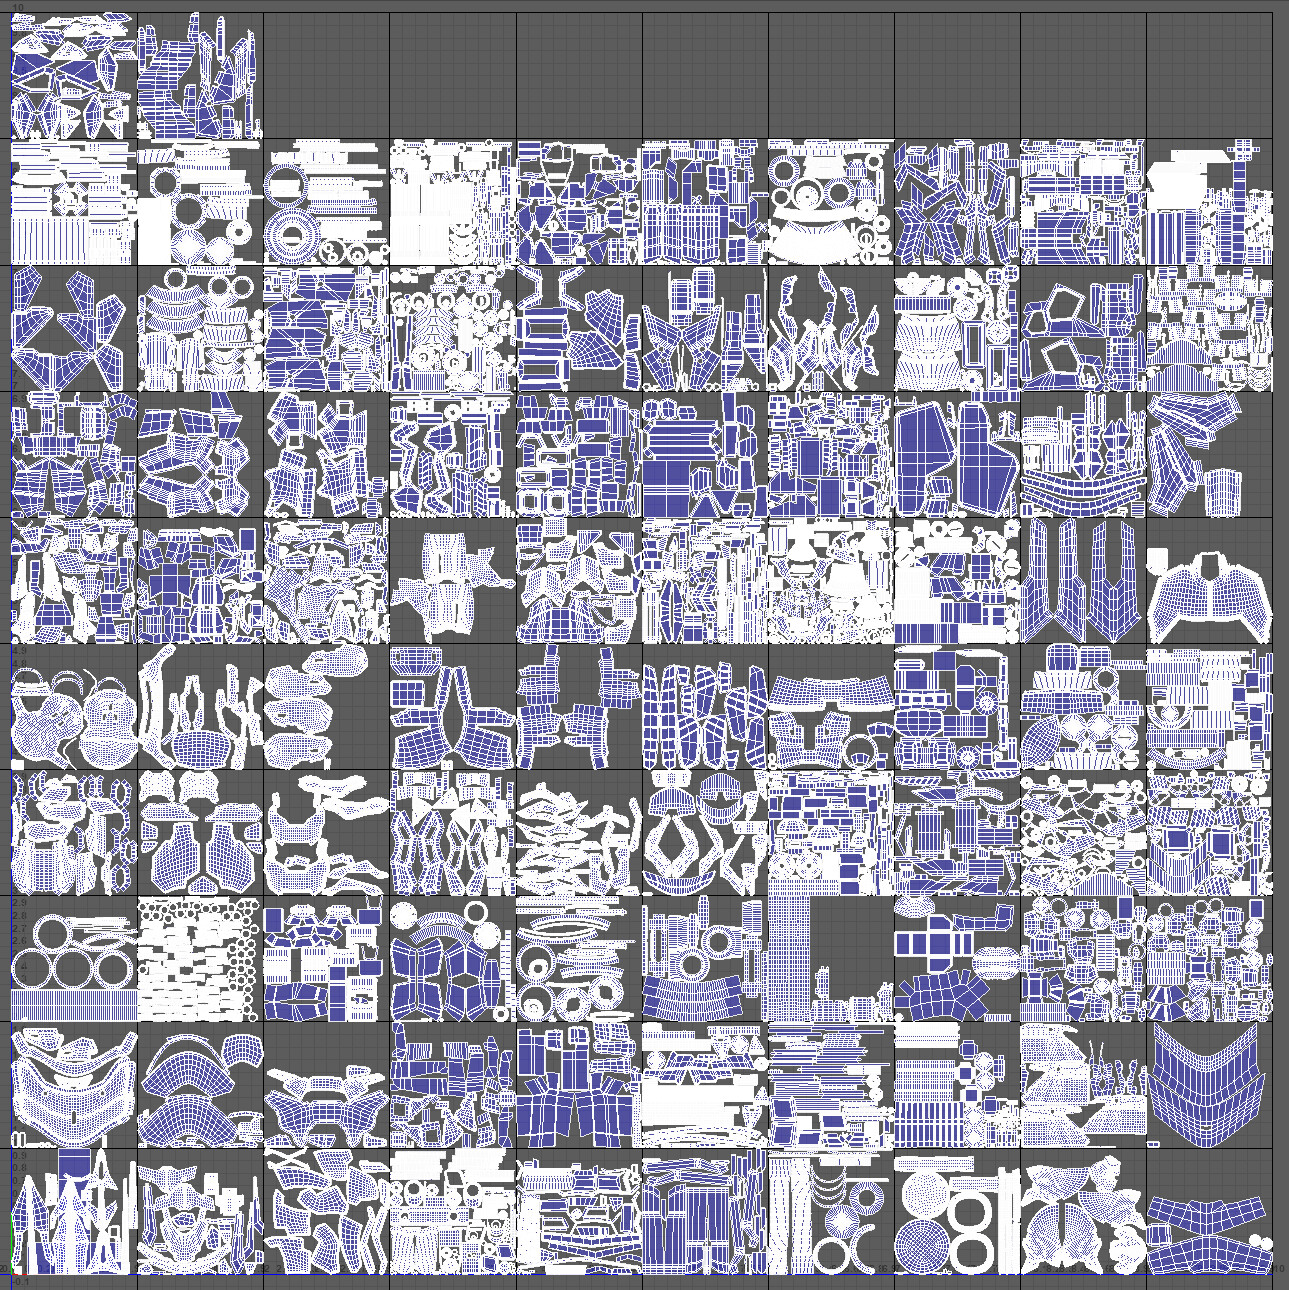 total number of texture maps : 547
number of UDIM texture tiles for SAZABI : 92
texture resolution per UDIM tile : ranges from 1024-4096
total texture memory size on disk for all : 1.5 GB